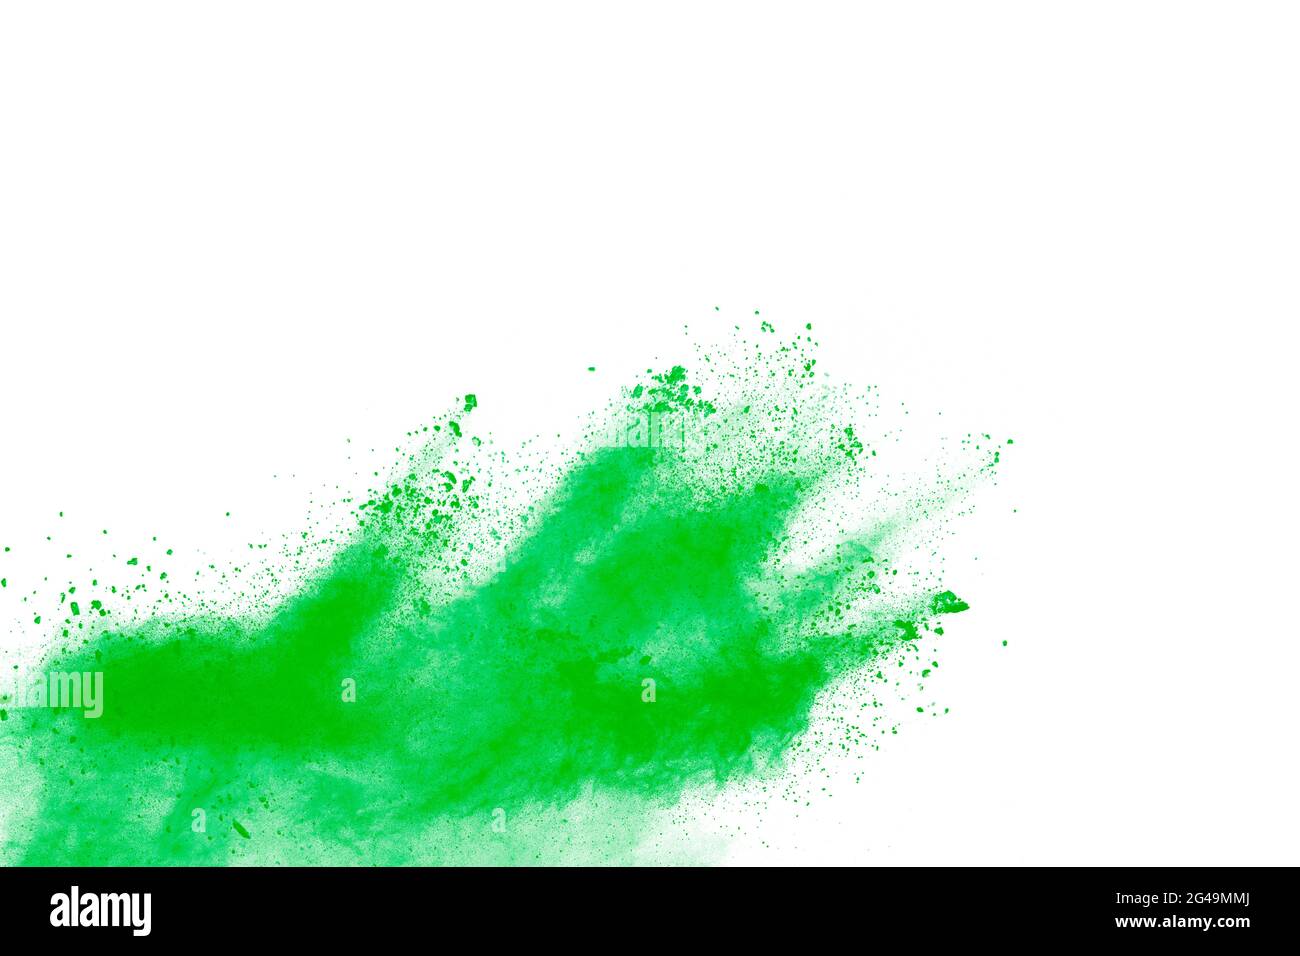 Abstract green powder explosion on white background. Stock Photo